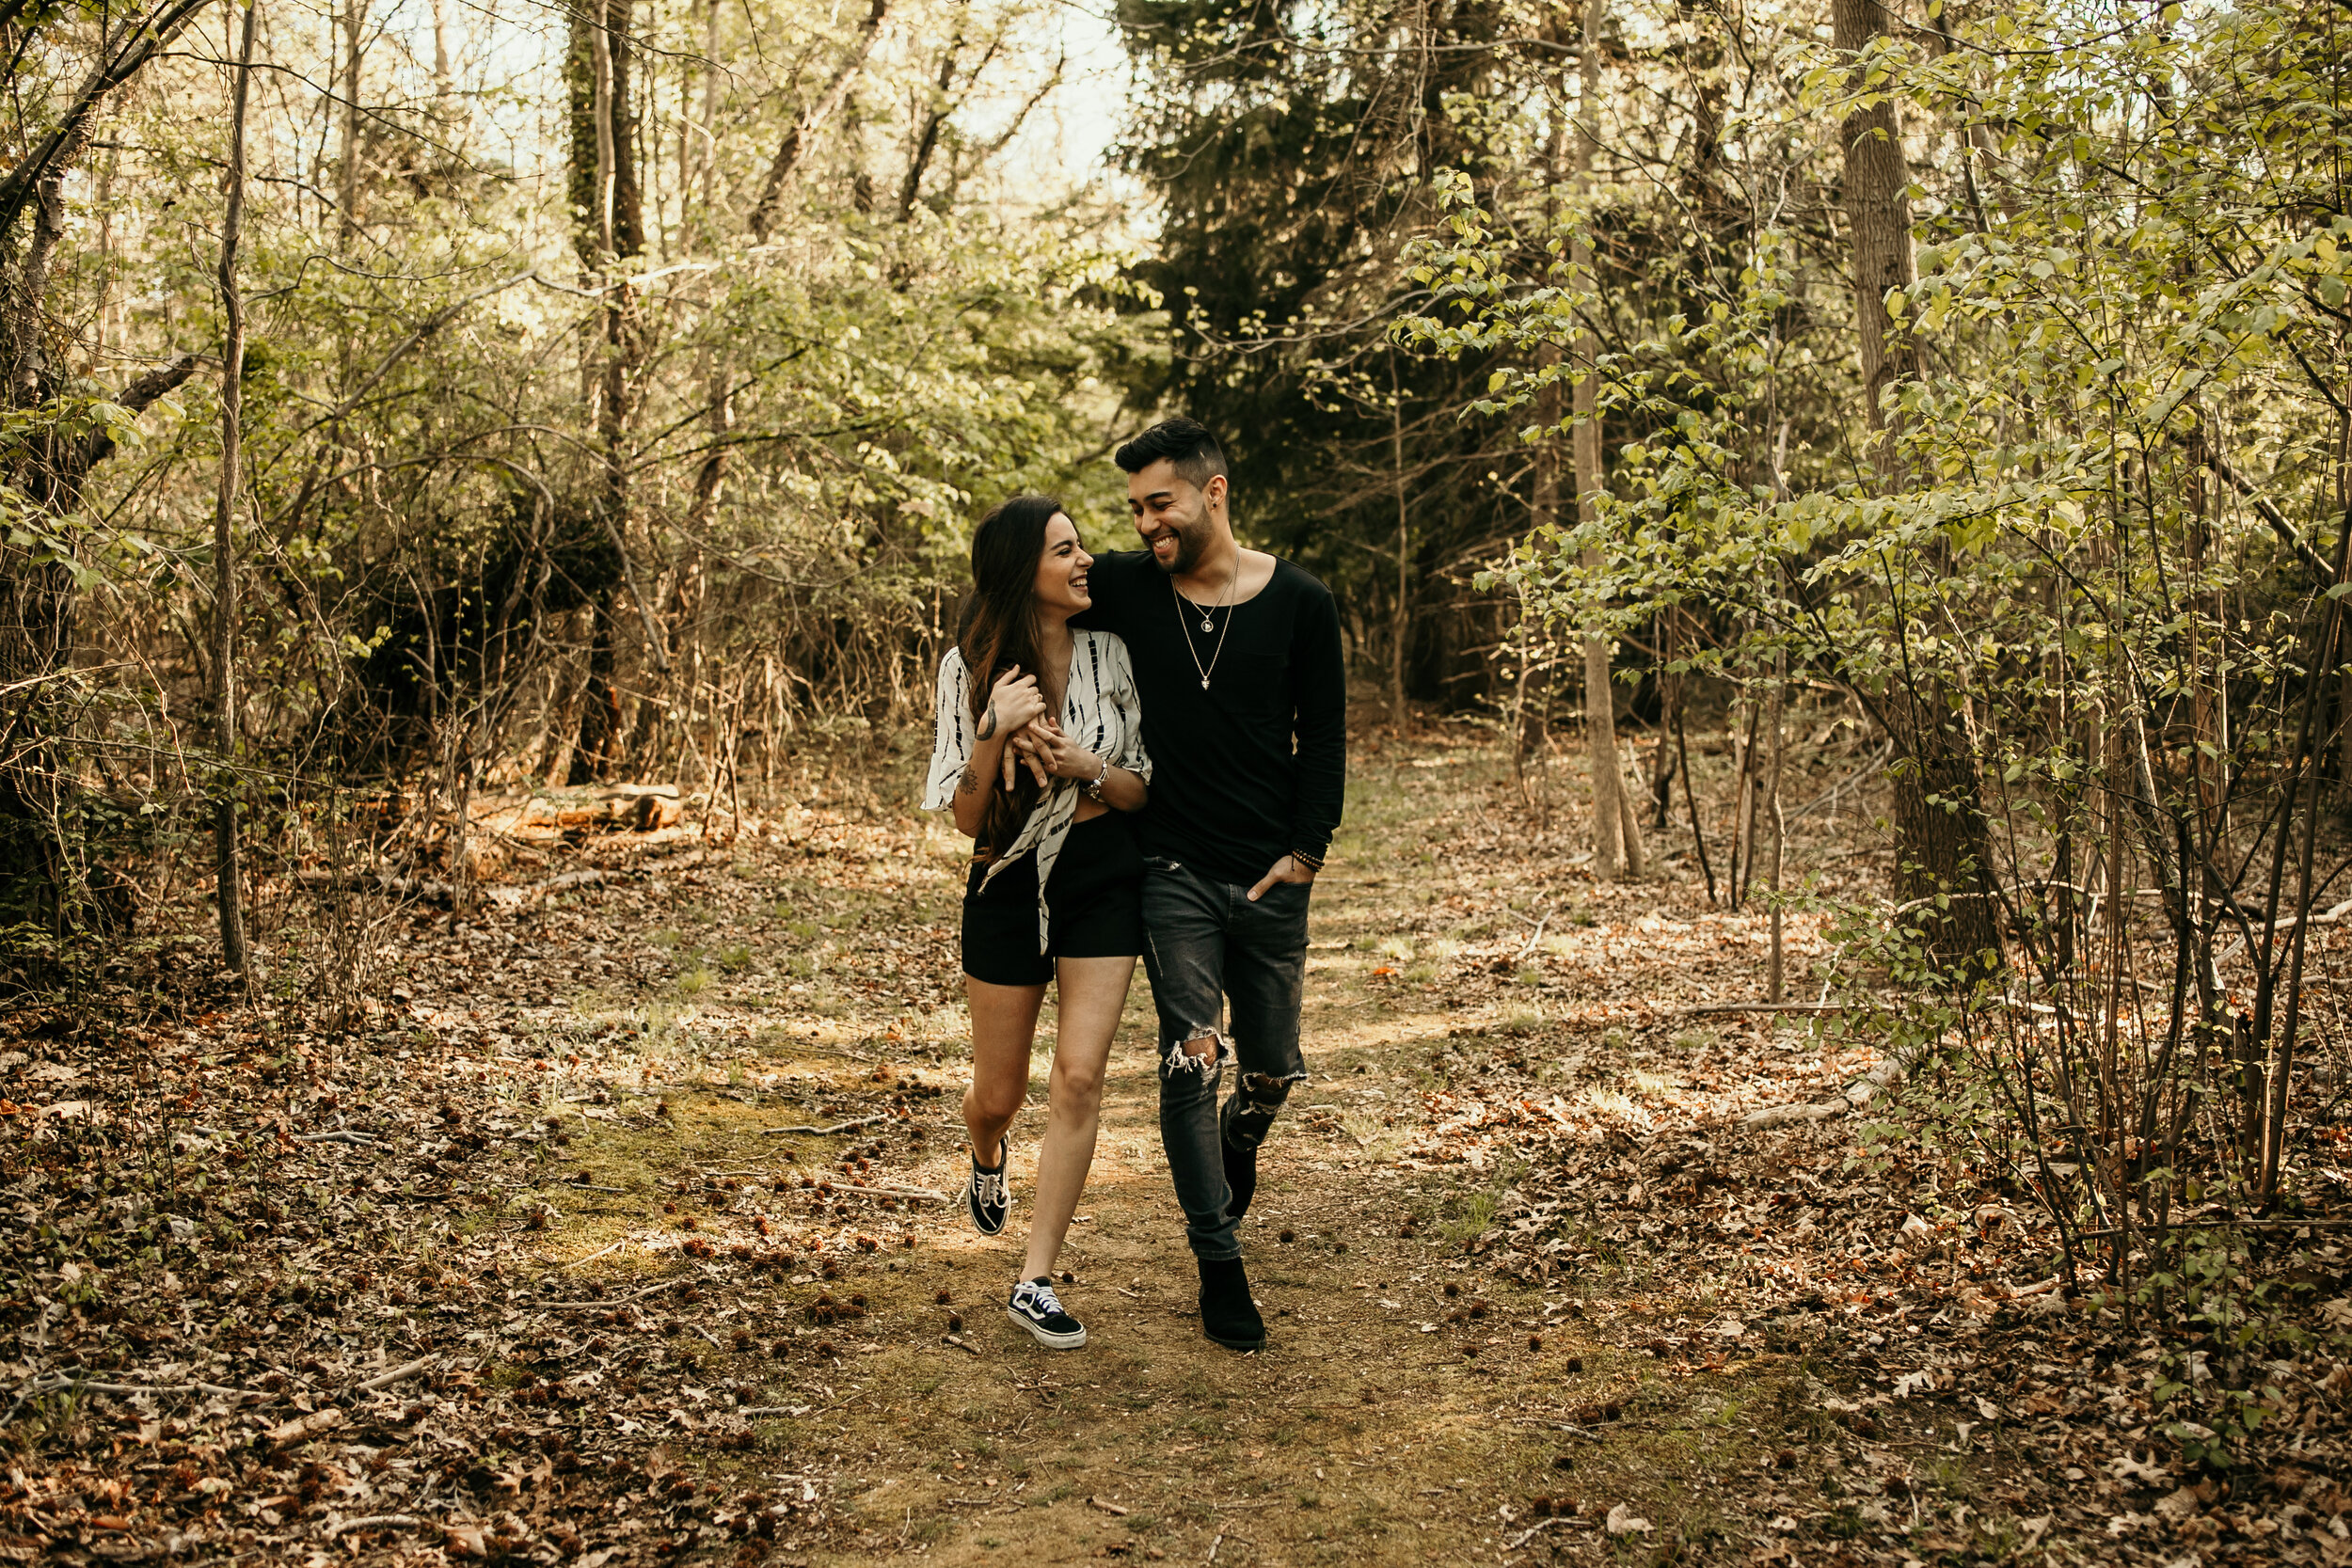 Engagement Session in the woods. Candid photos. www.sarahvendramini.com